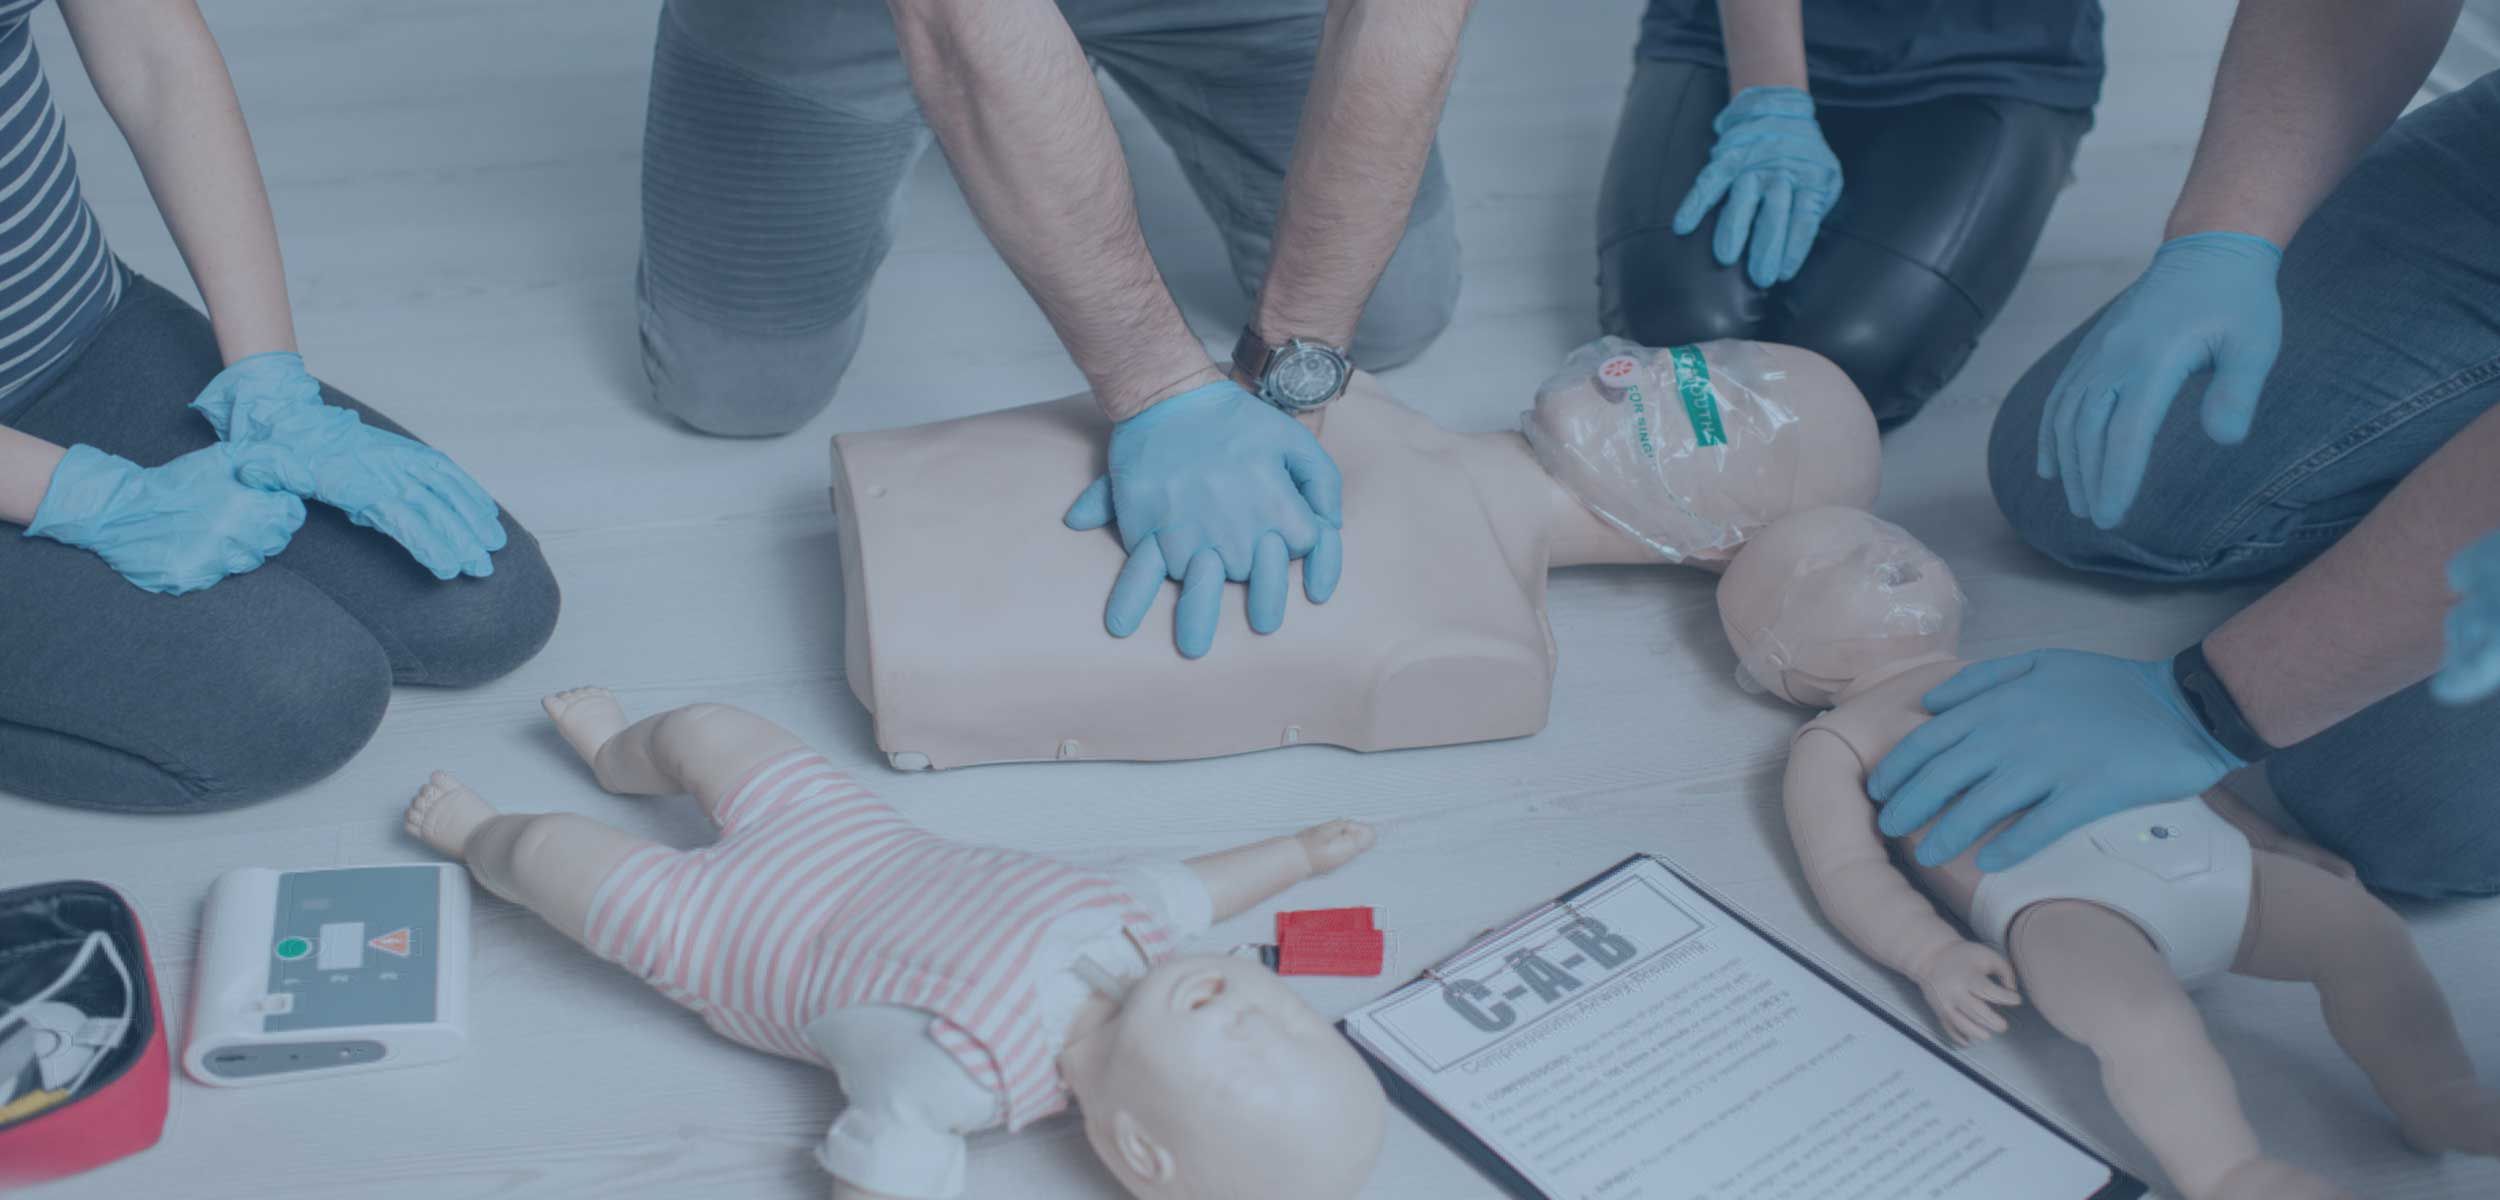 CPR first aid training courses